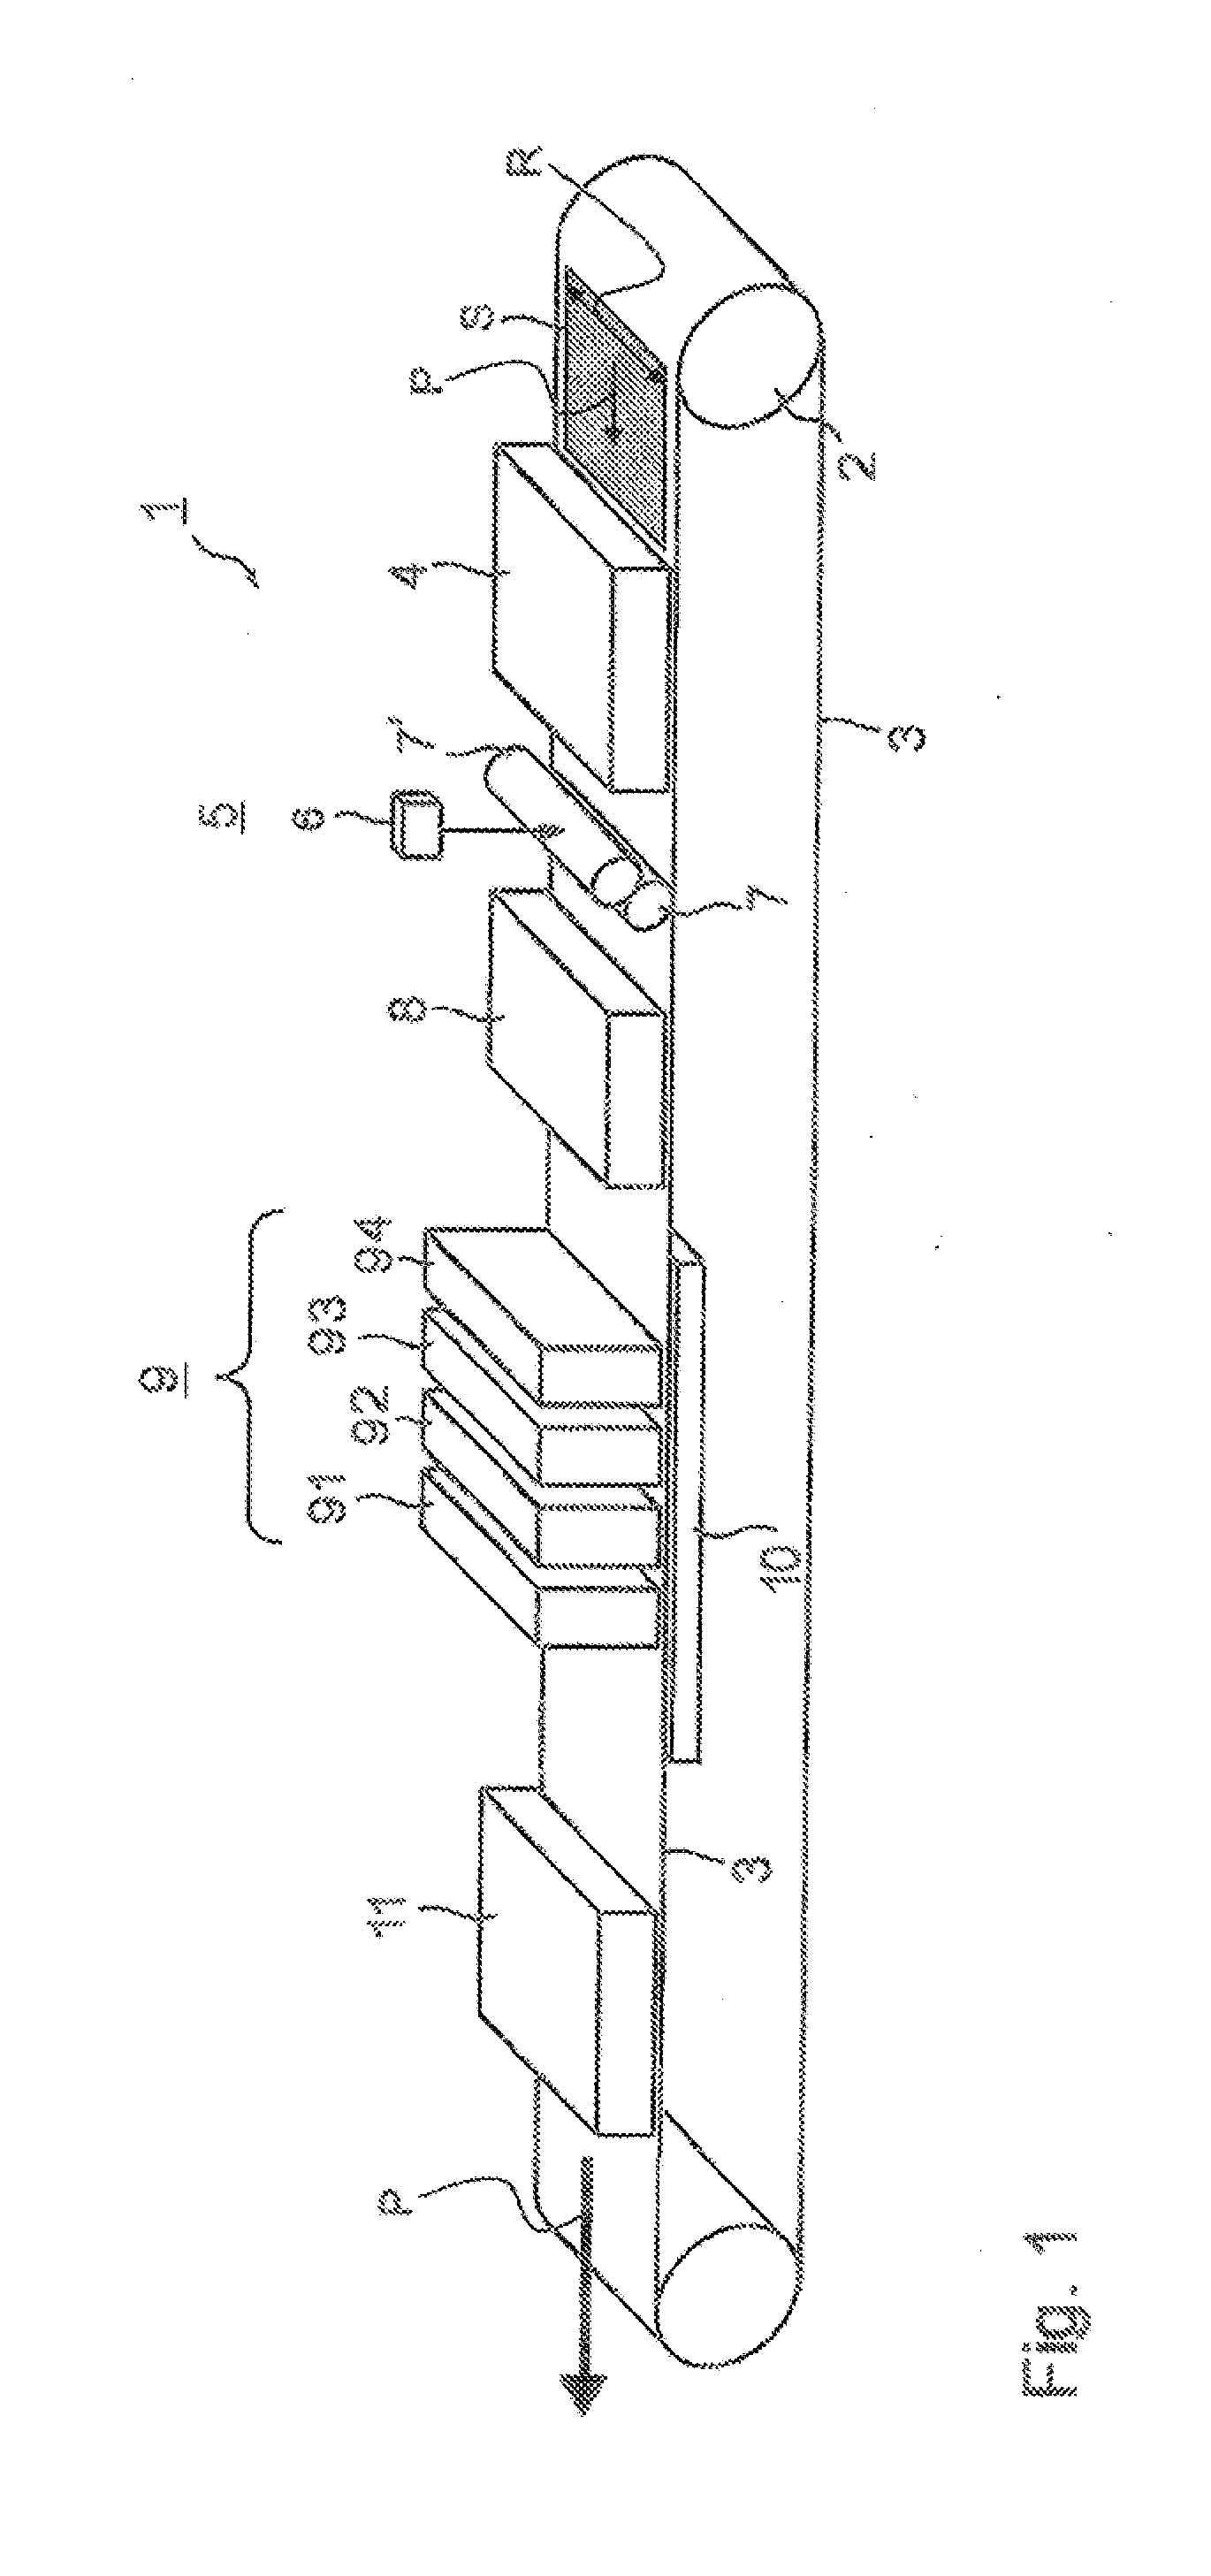 Apparatus and method for defect detection in a printing system